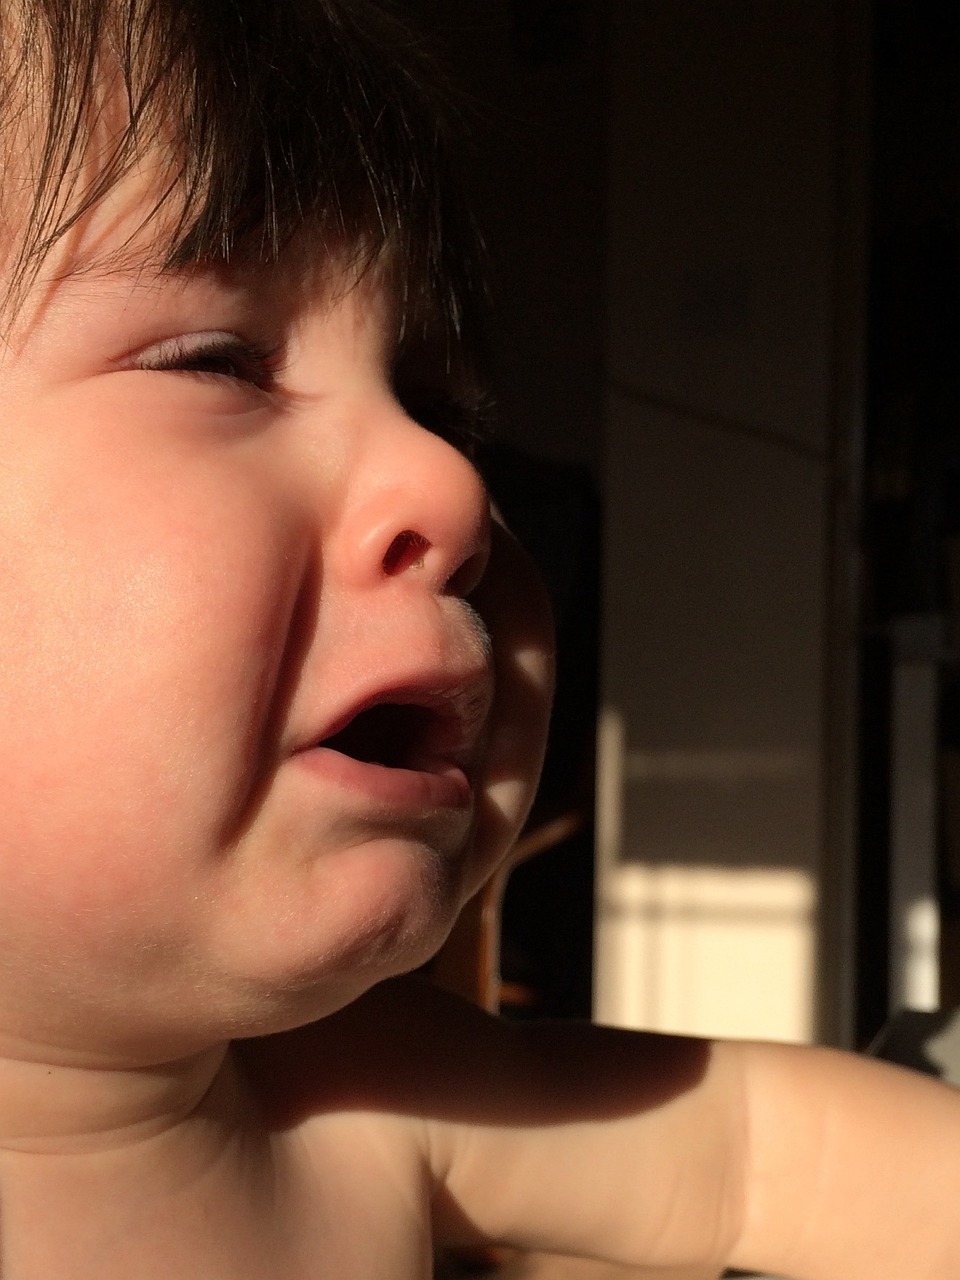 a close up of a child with a toothbrush in his mouth, by Jan Rustem, flickr, precisionism, sun behind her, giga chad crying, patricia piccinini, in a sunbeam